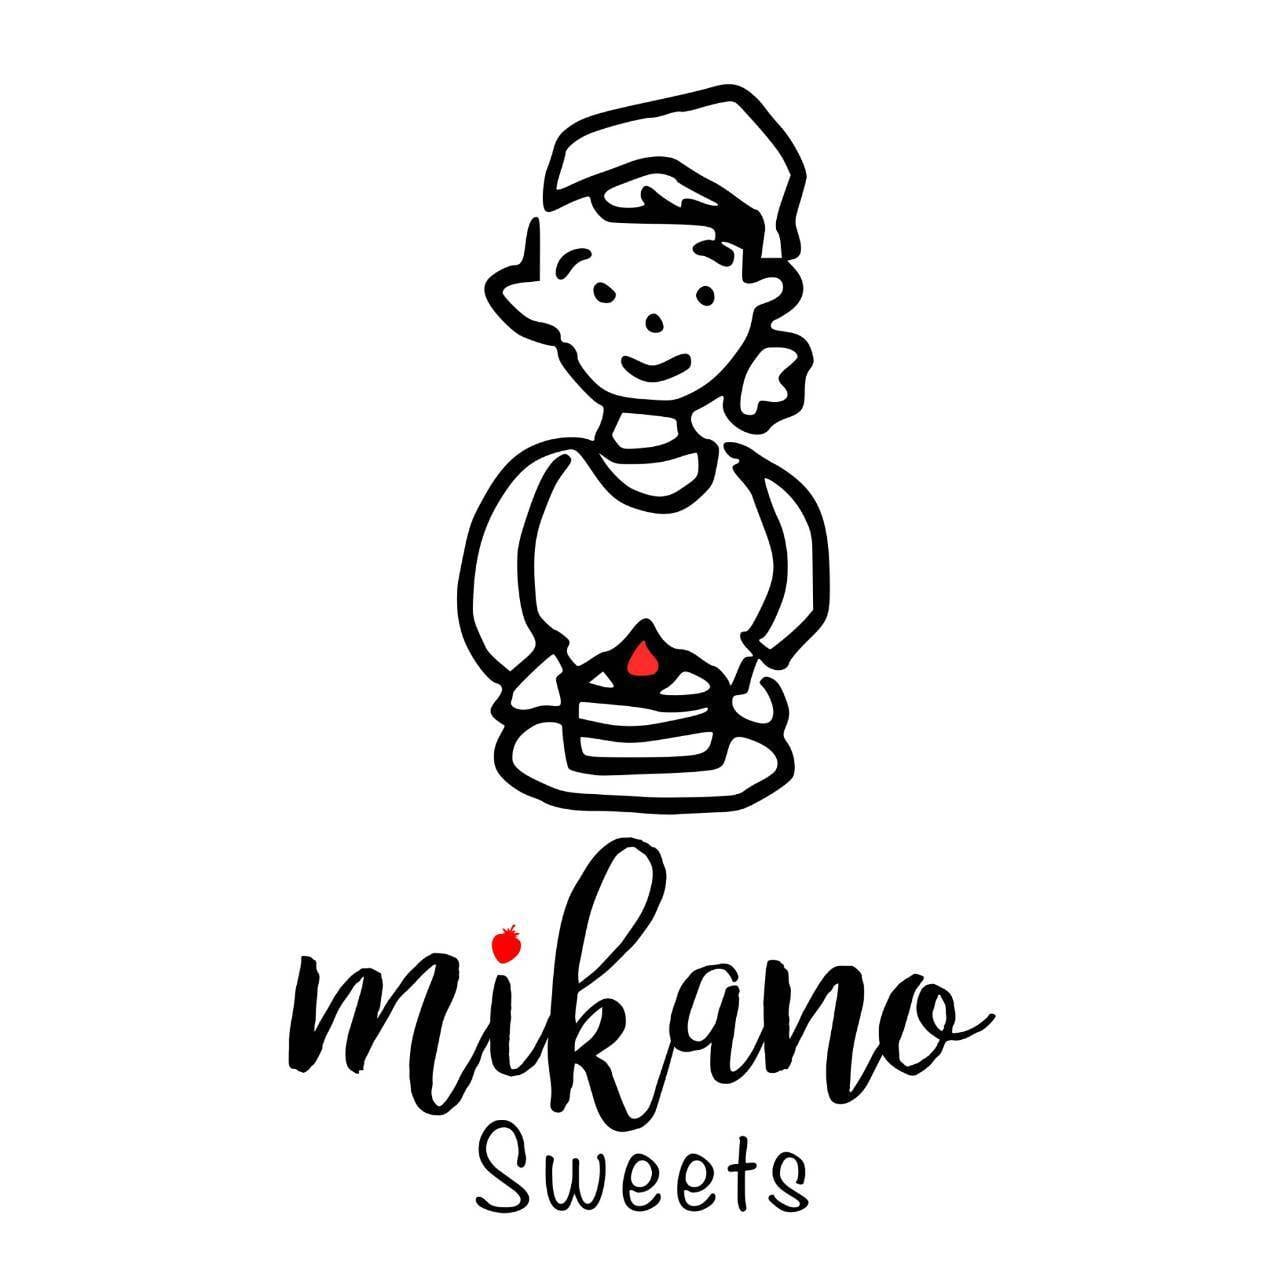 mikanosweets